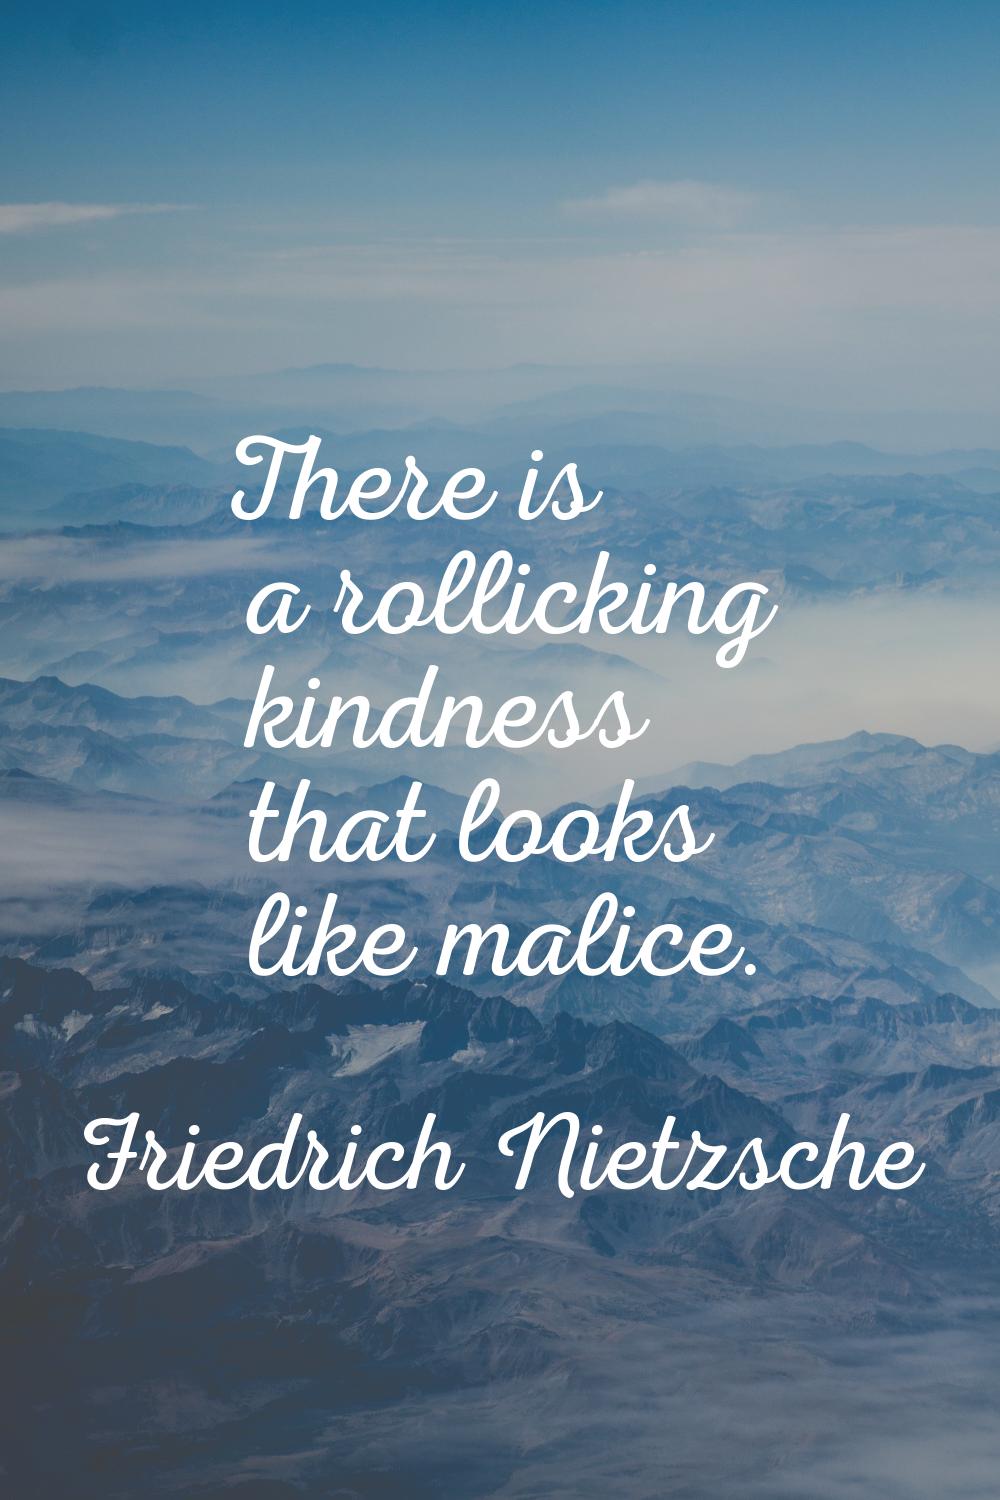 There is a rollicking kindness that looks like malice.